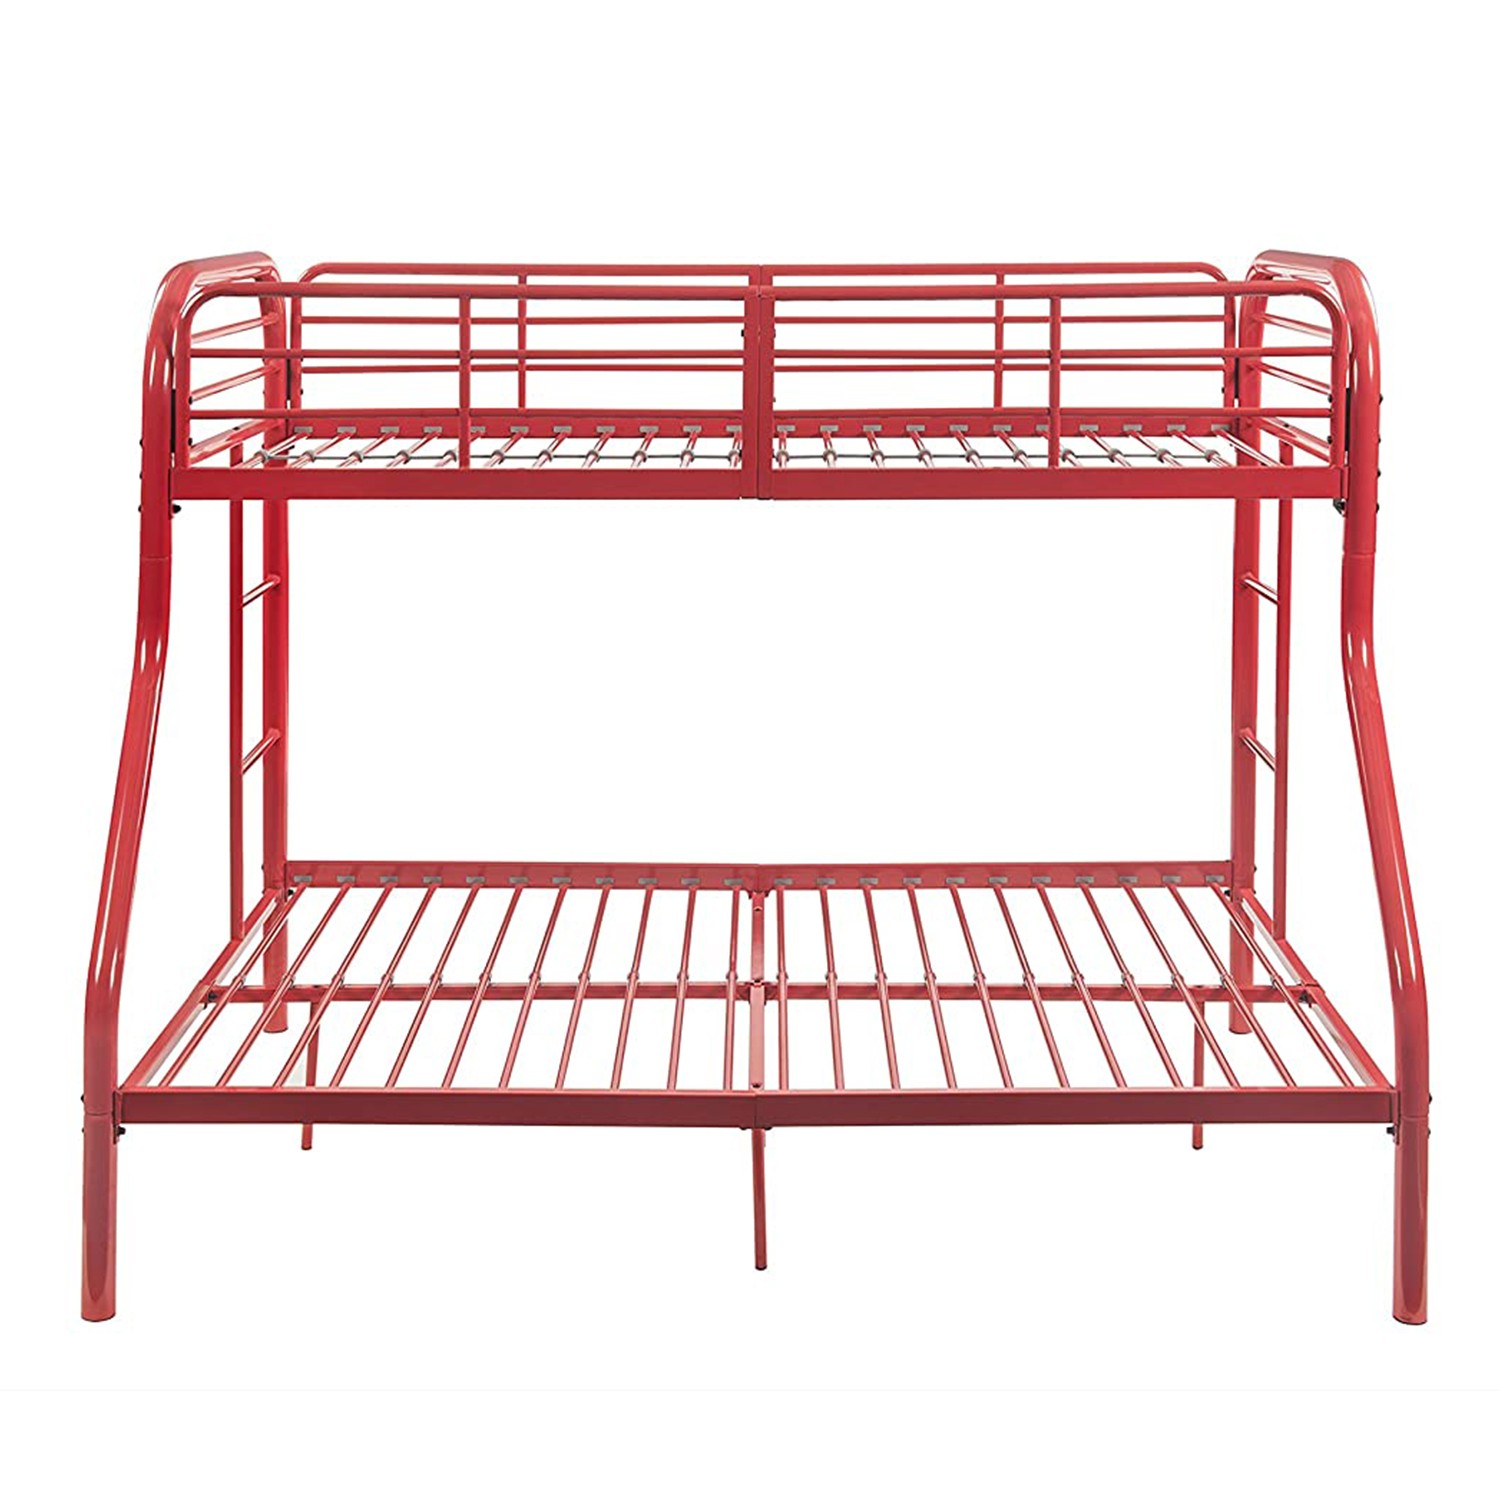 56" X 79" X 55.5" Twin Over Full Red Metal Bunk Bed